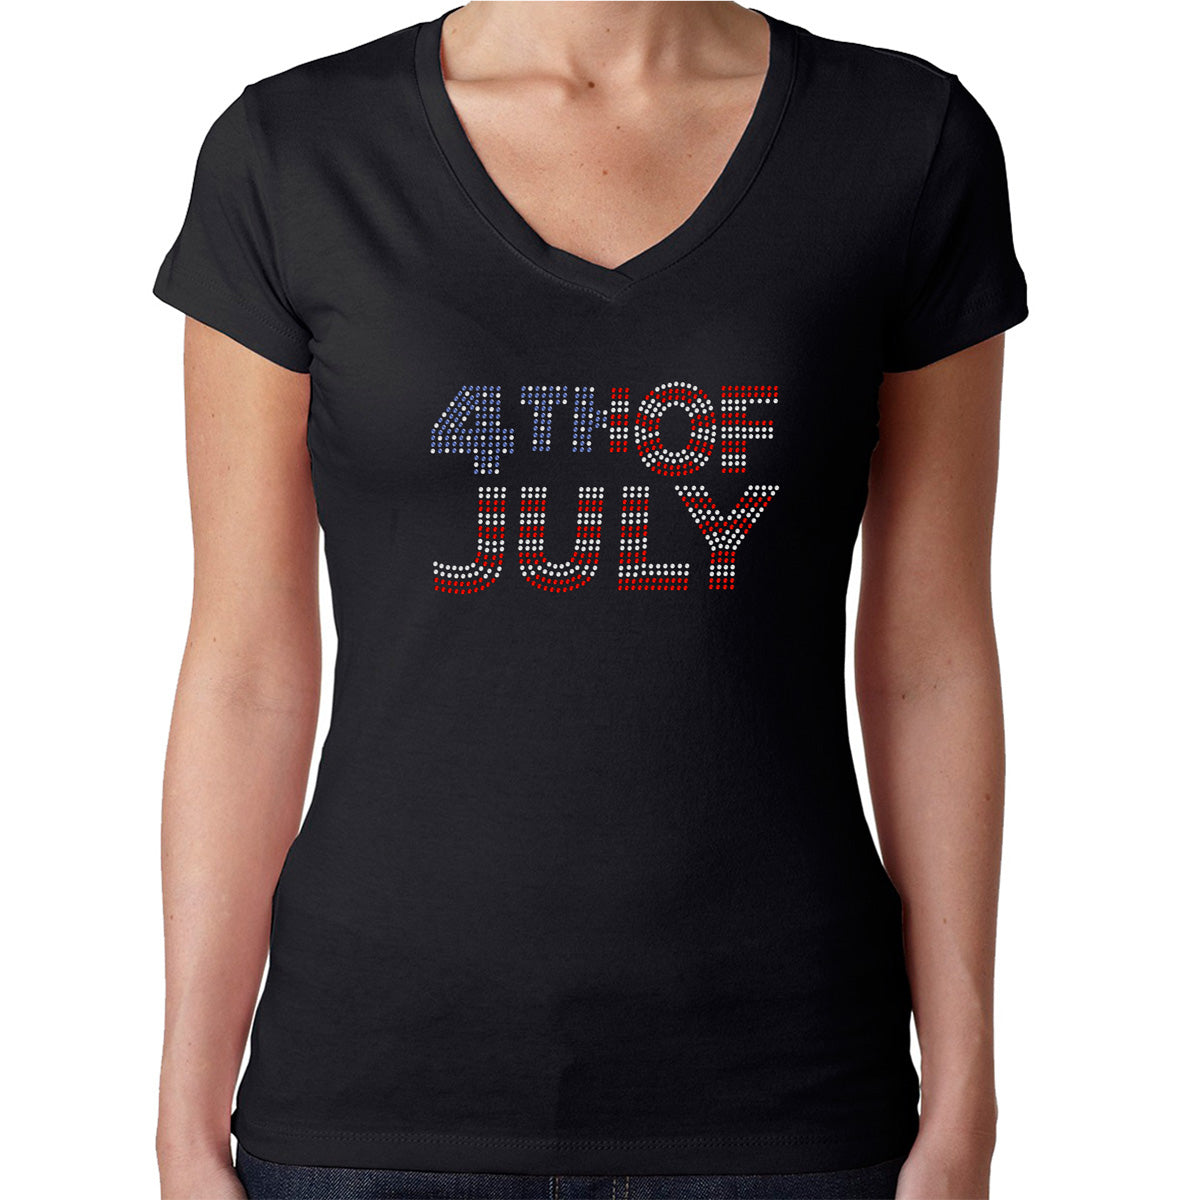 Womens T-Shirt Rhinestone Bling Black Fitted Tee 4th of July Flag Red White Blue